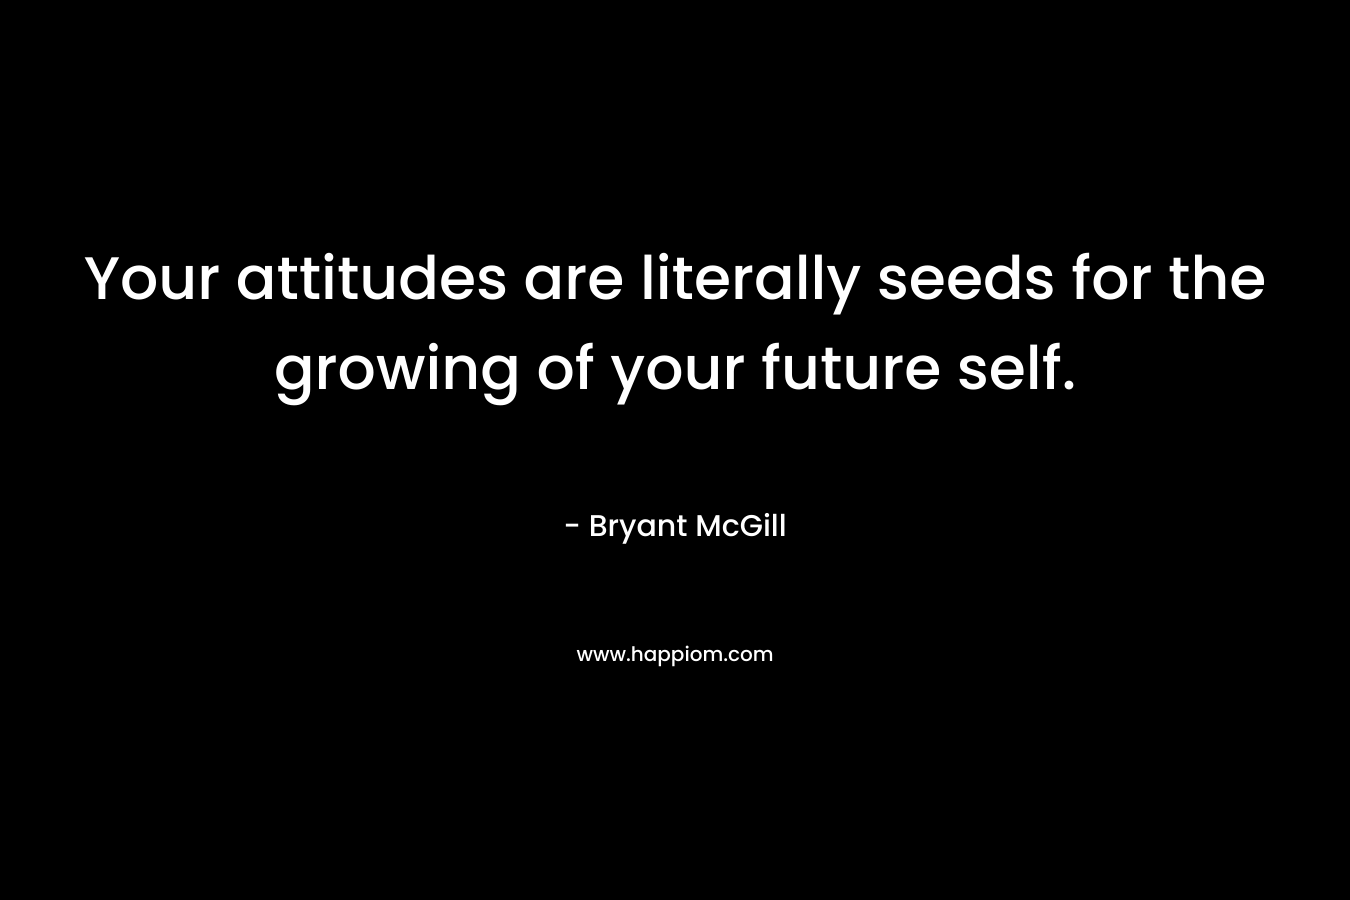 Your attitudes are literally seeds for the growing of your future self.